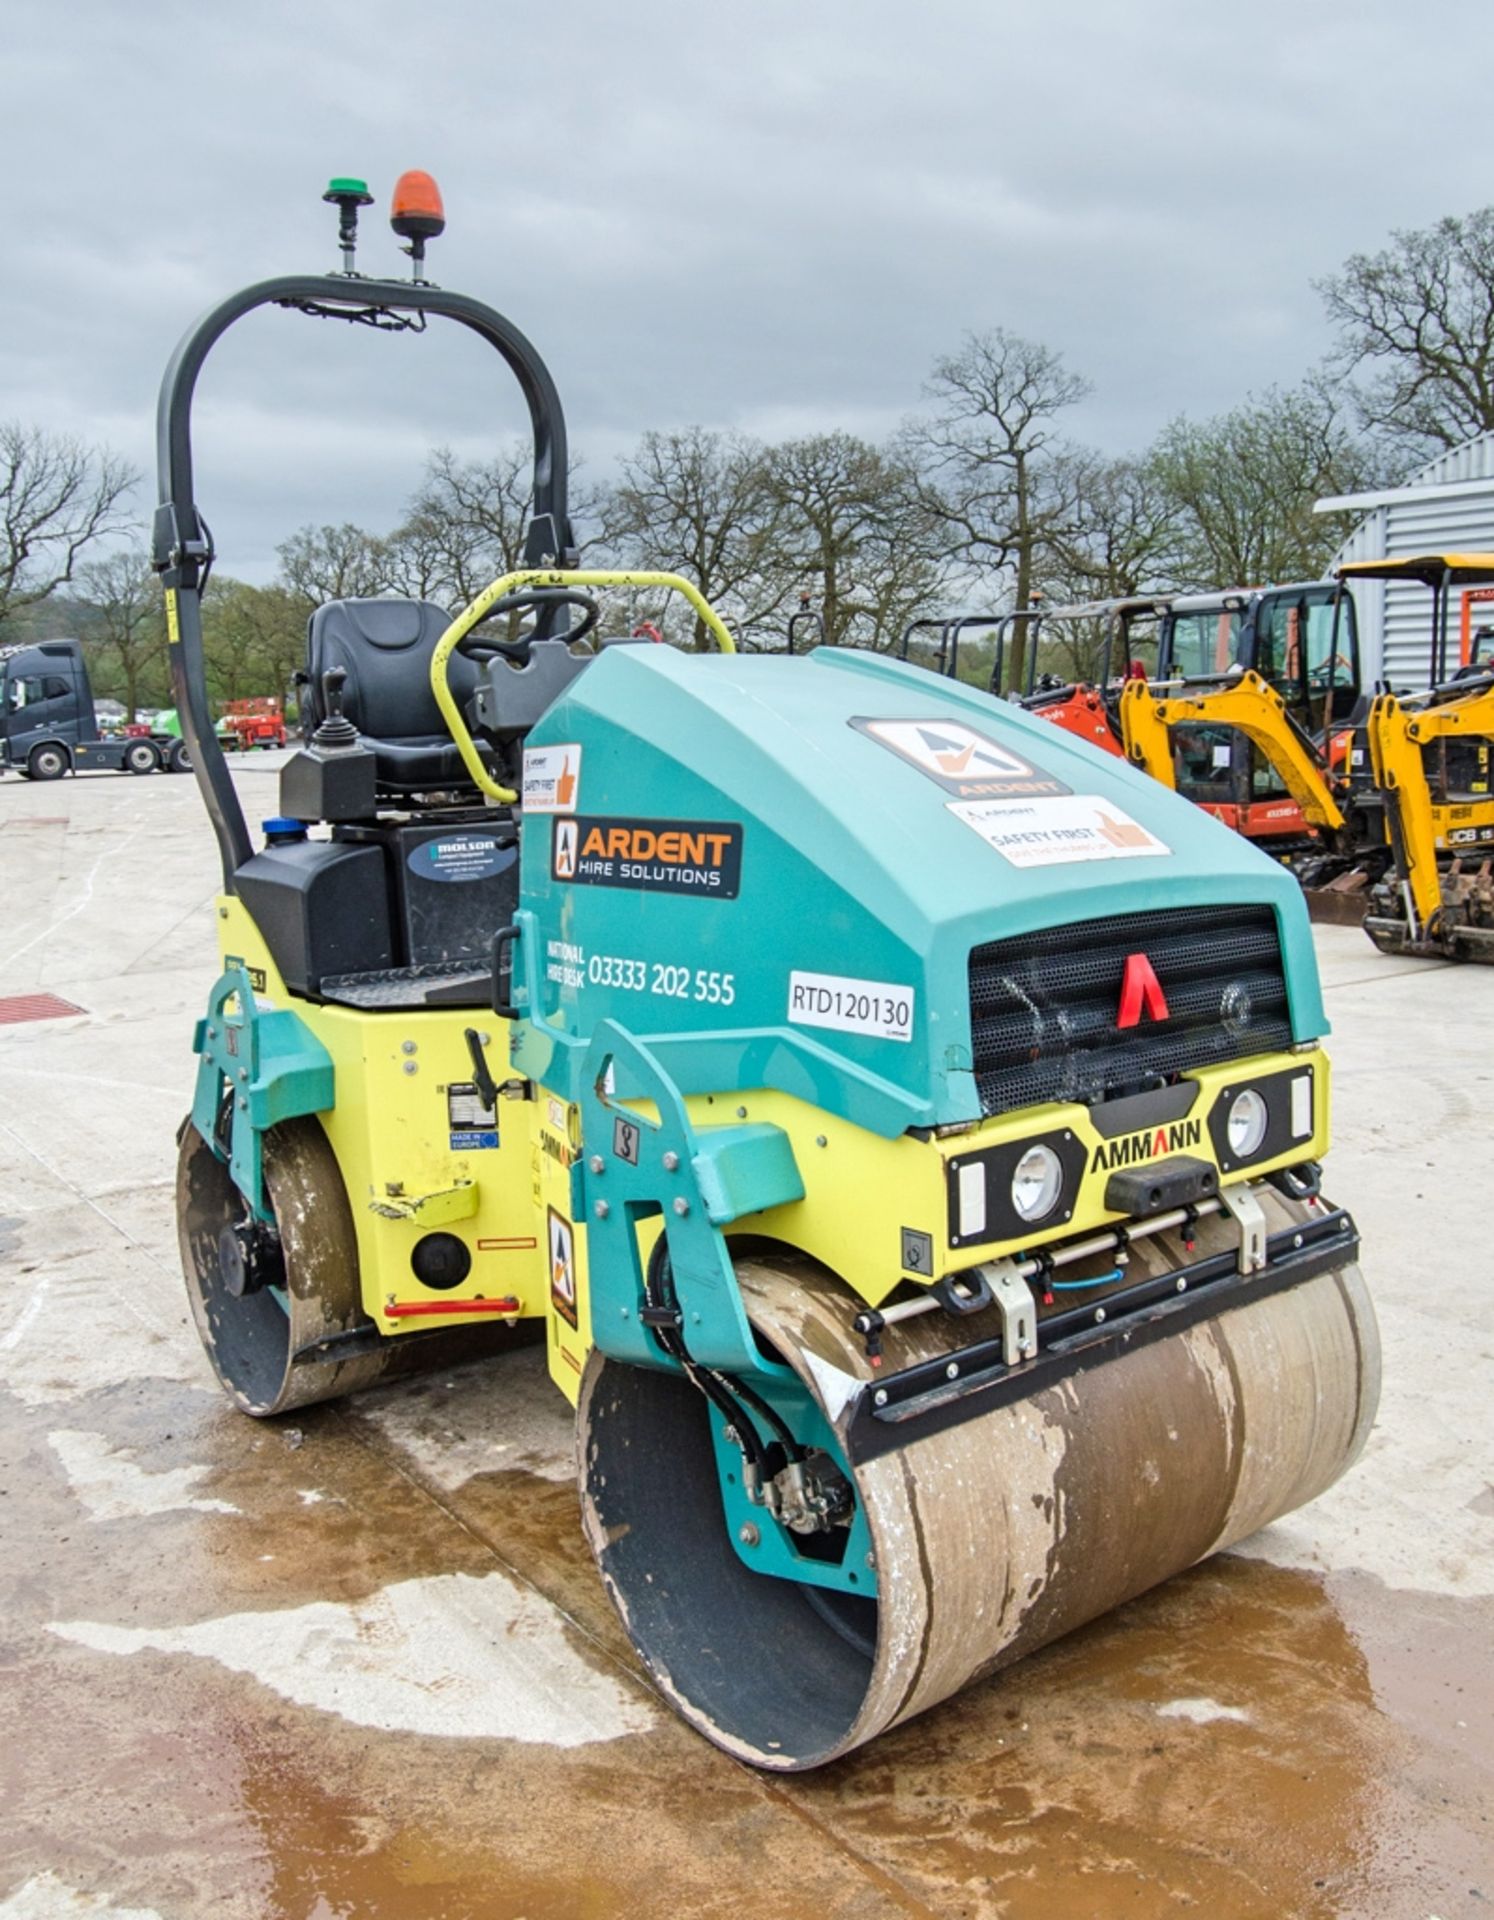 Ammann ARX 26-1 double drum ride on roller Year: 2022 S/N: 3023580 Recorded Hours: 225 RTD120130 - Image 2 of 21